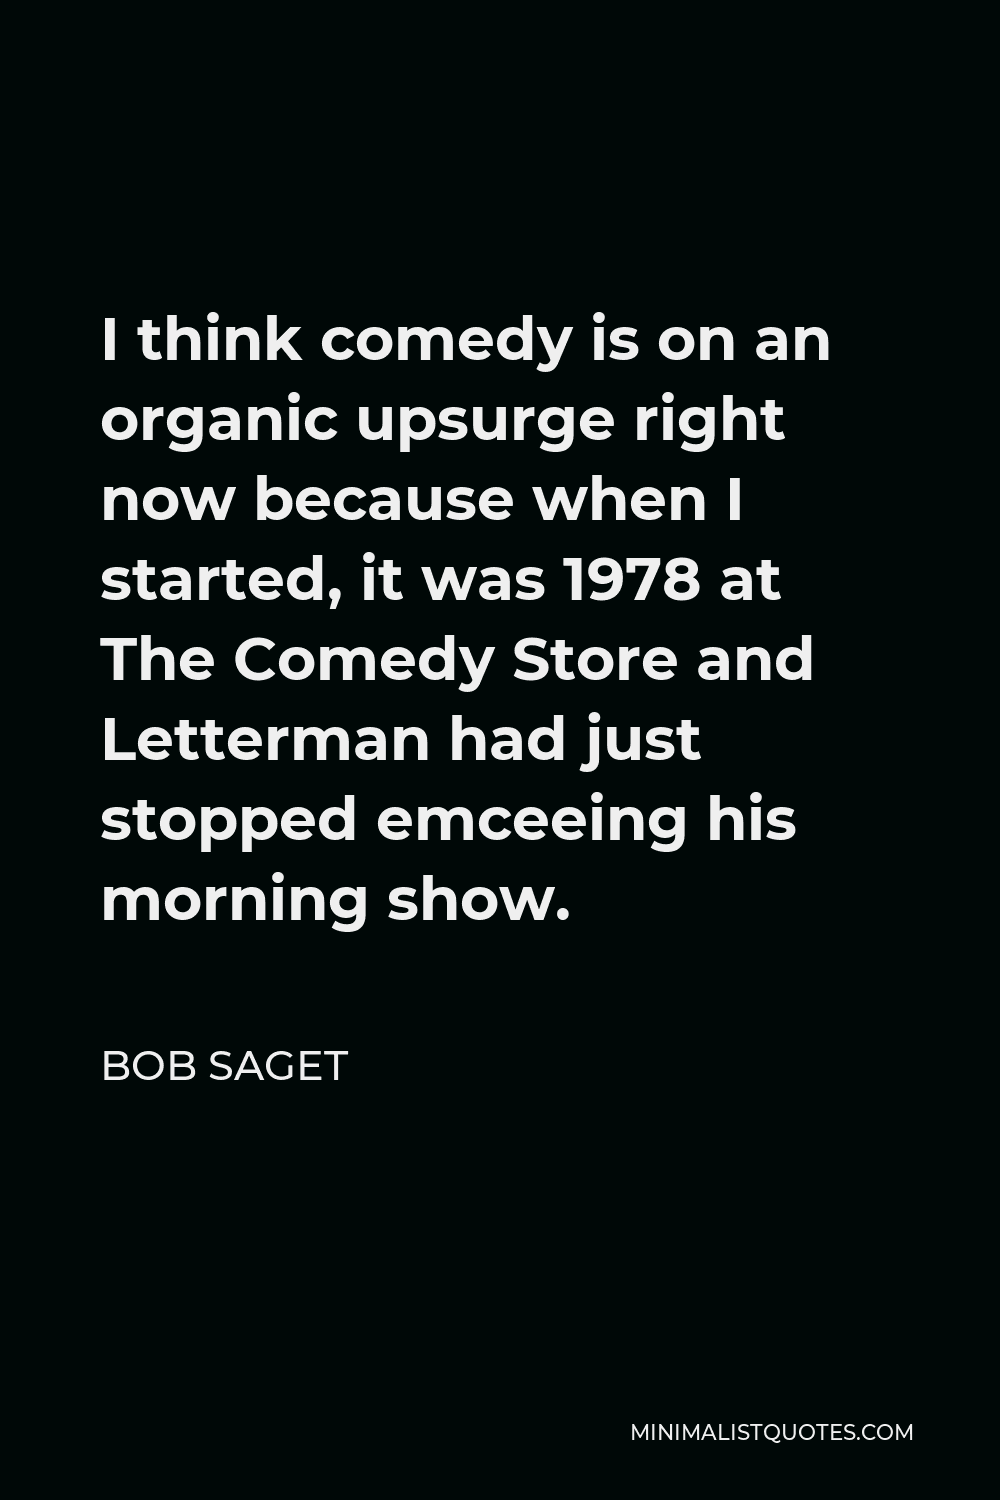 Bob Saget Quote - I think comedy is on an organic upsurge right now because when I started, it was 1978 at The Comedy Store and Letterman had just stopped emceeing his morning show.